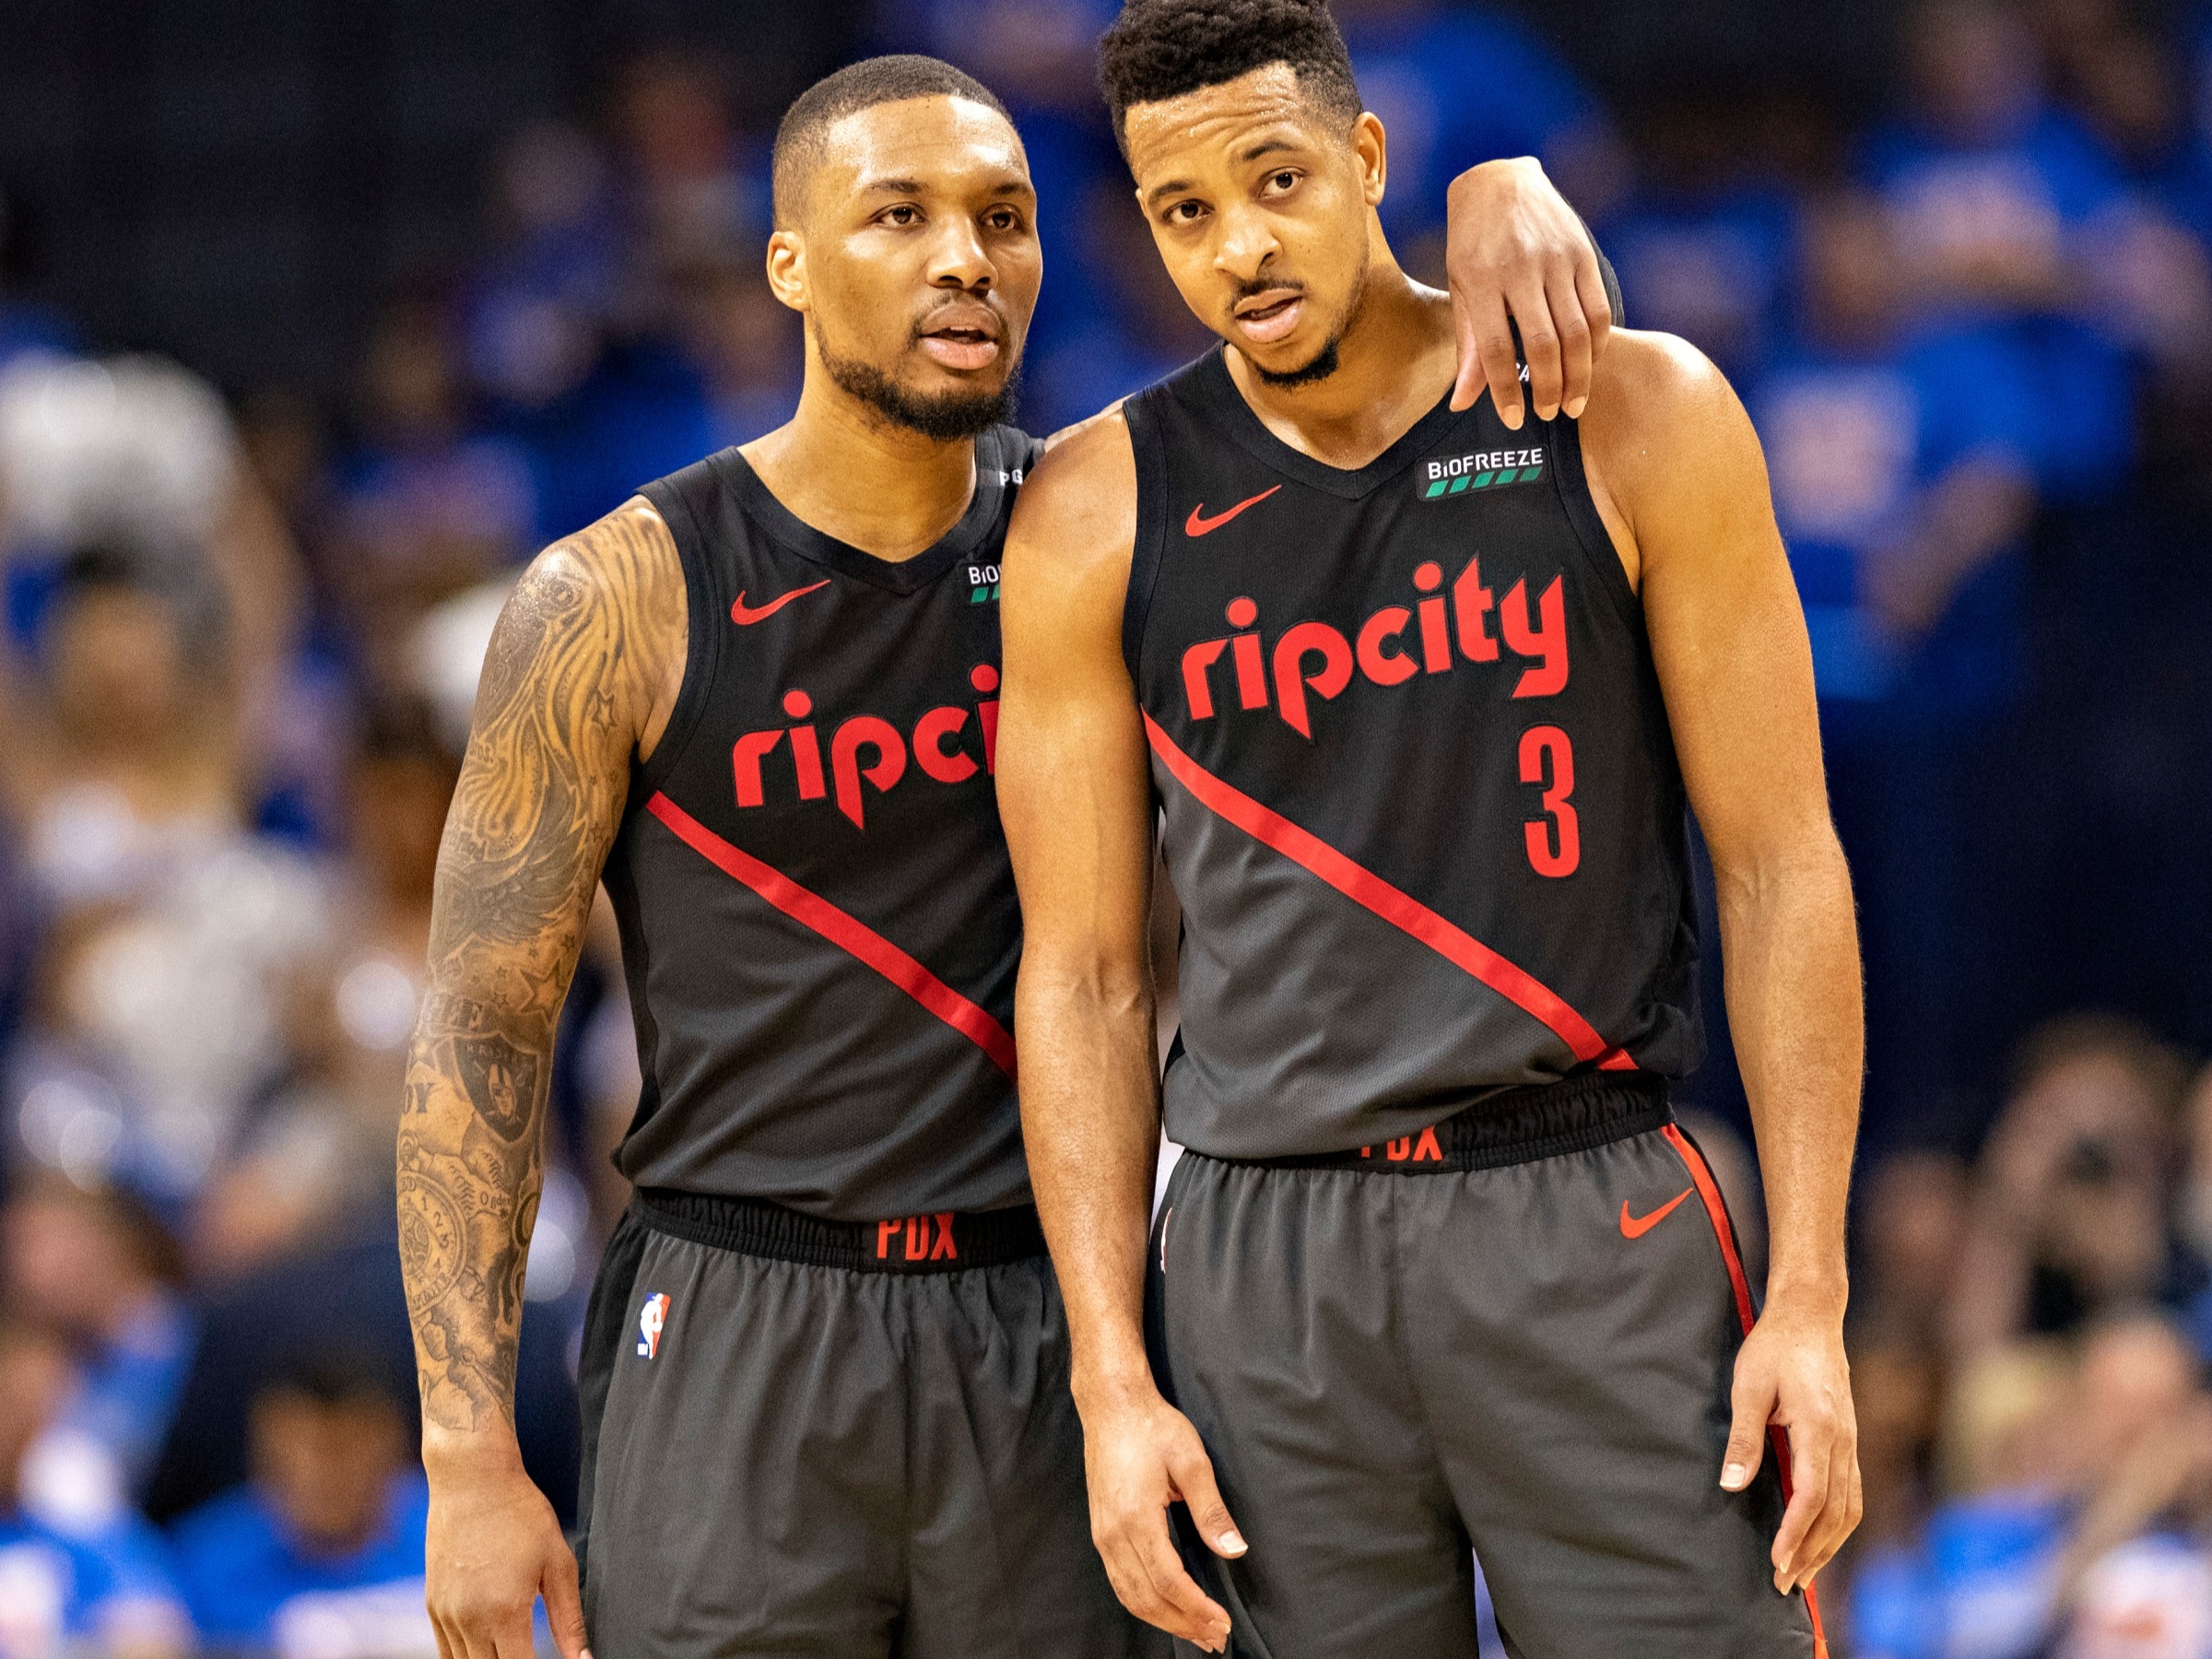 The Portland Trail Blazers (colloquially known as the Blazers) are an American professional basketball team based in Portland, Oregon. The Trail Blaze...